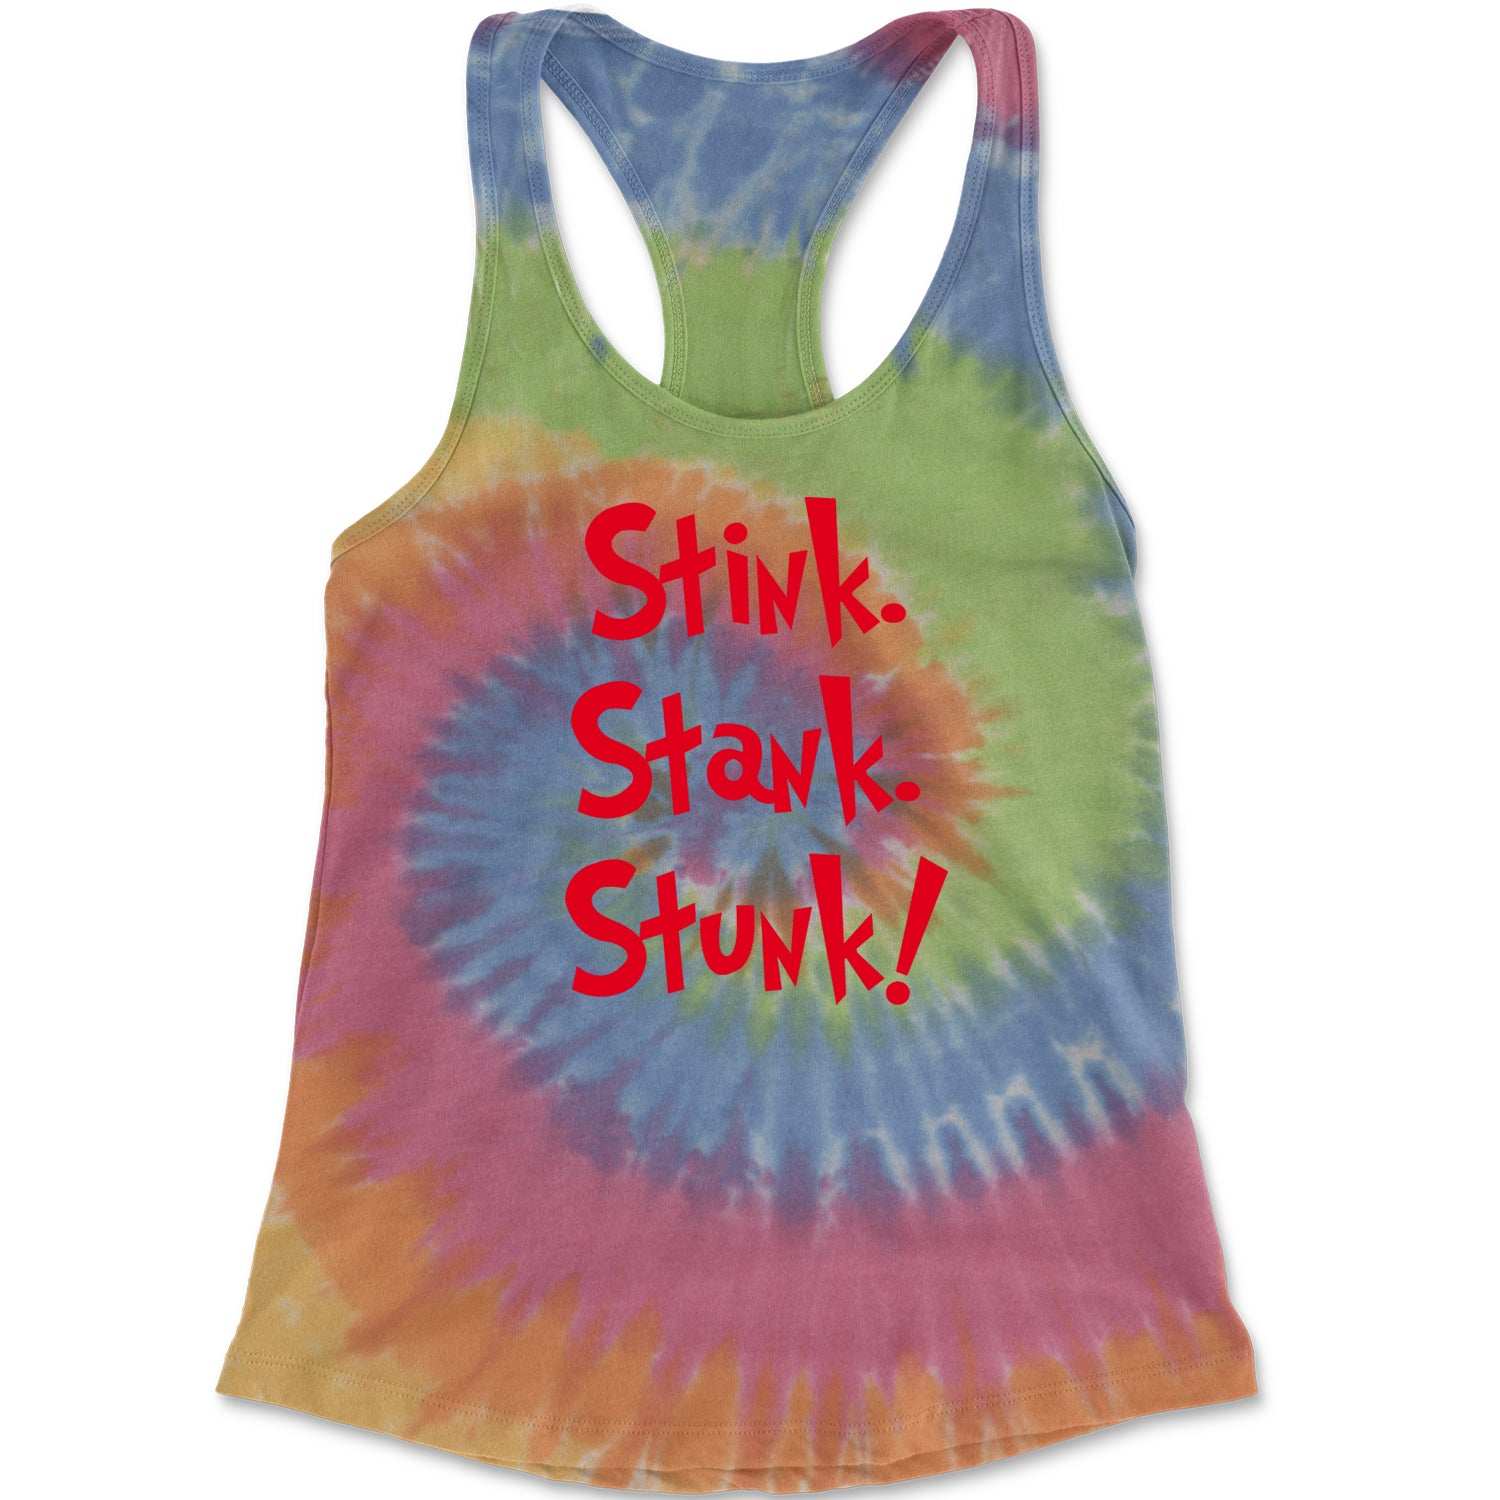 Stink Stank Stunk Grinch Racerback Tank Top for Women christmas, holiday, sweater, ugly, xmas by Expression Tees